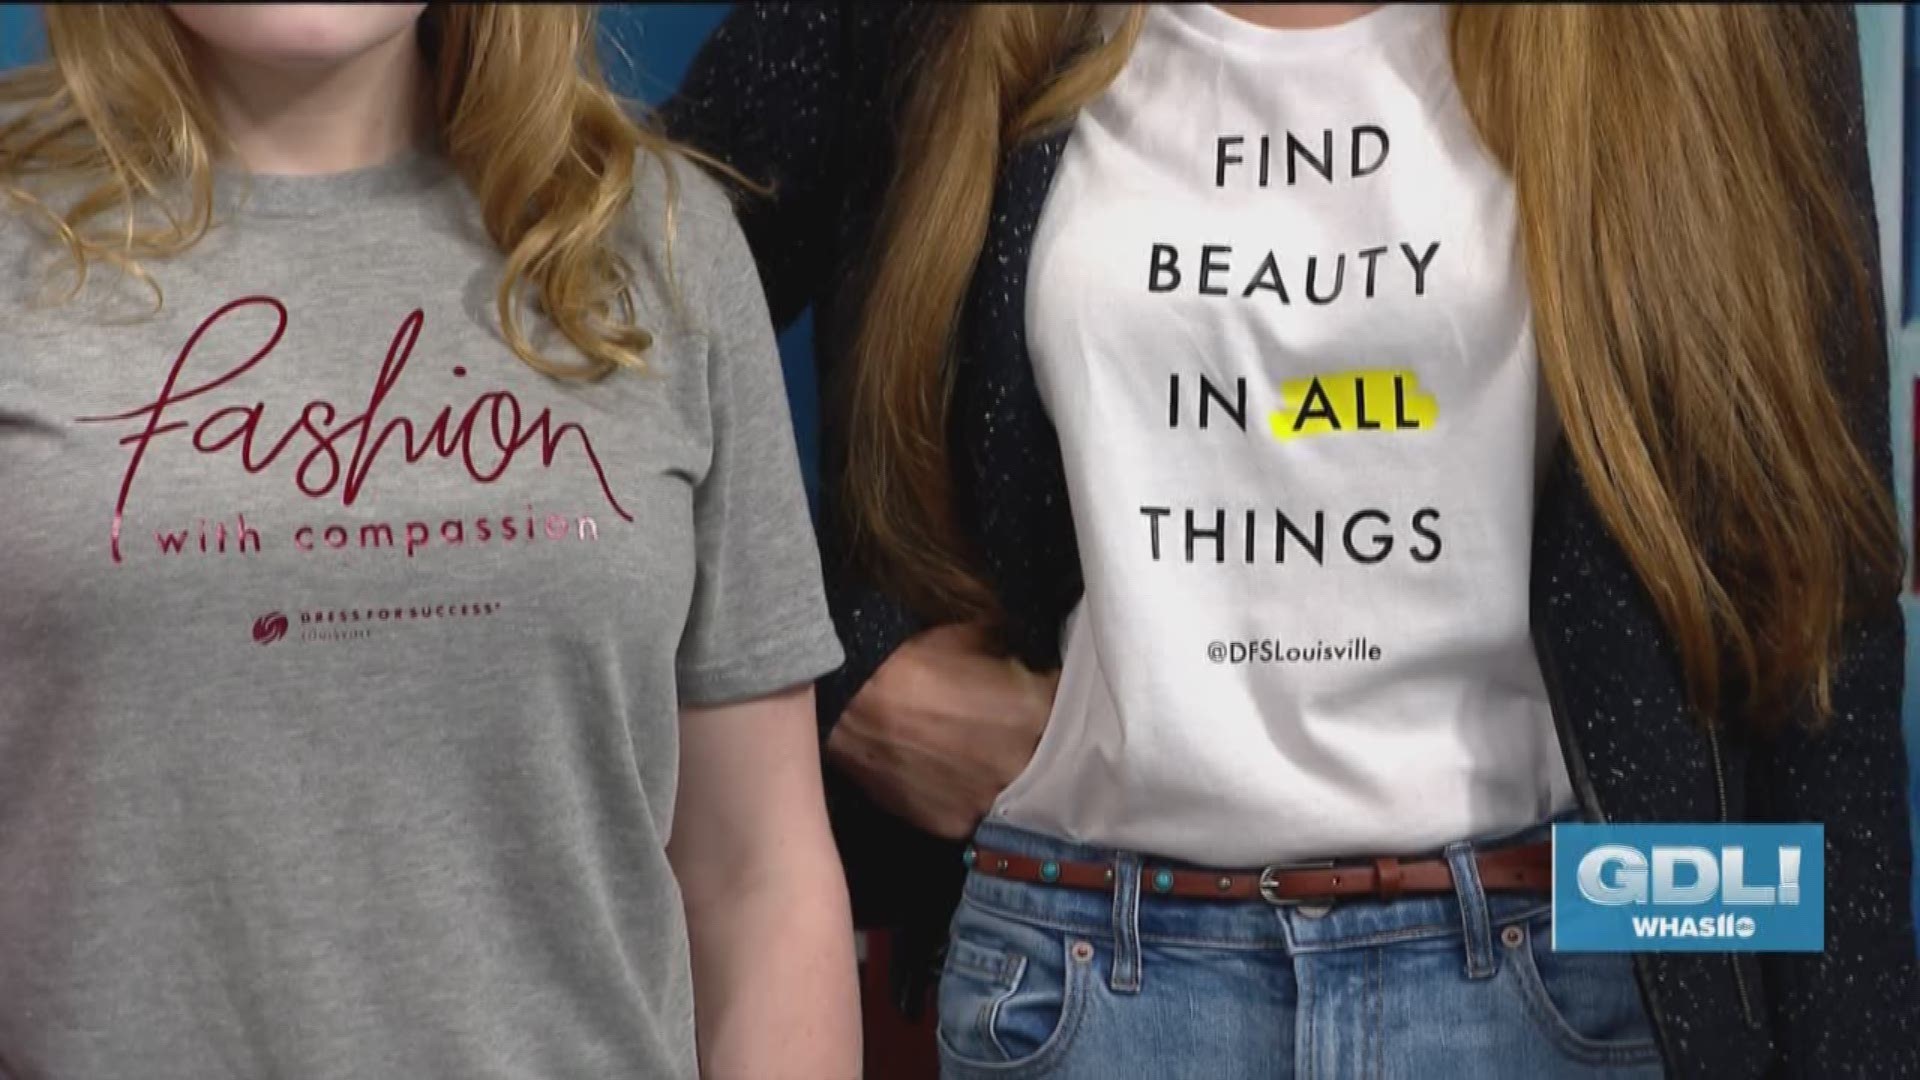 Dress For Success Louisville recently released a line of t-shirts to help raise funds to continue outfitting women in our community with confidence, style and the skills they need to succeed in work and life.